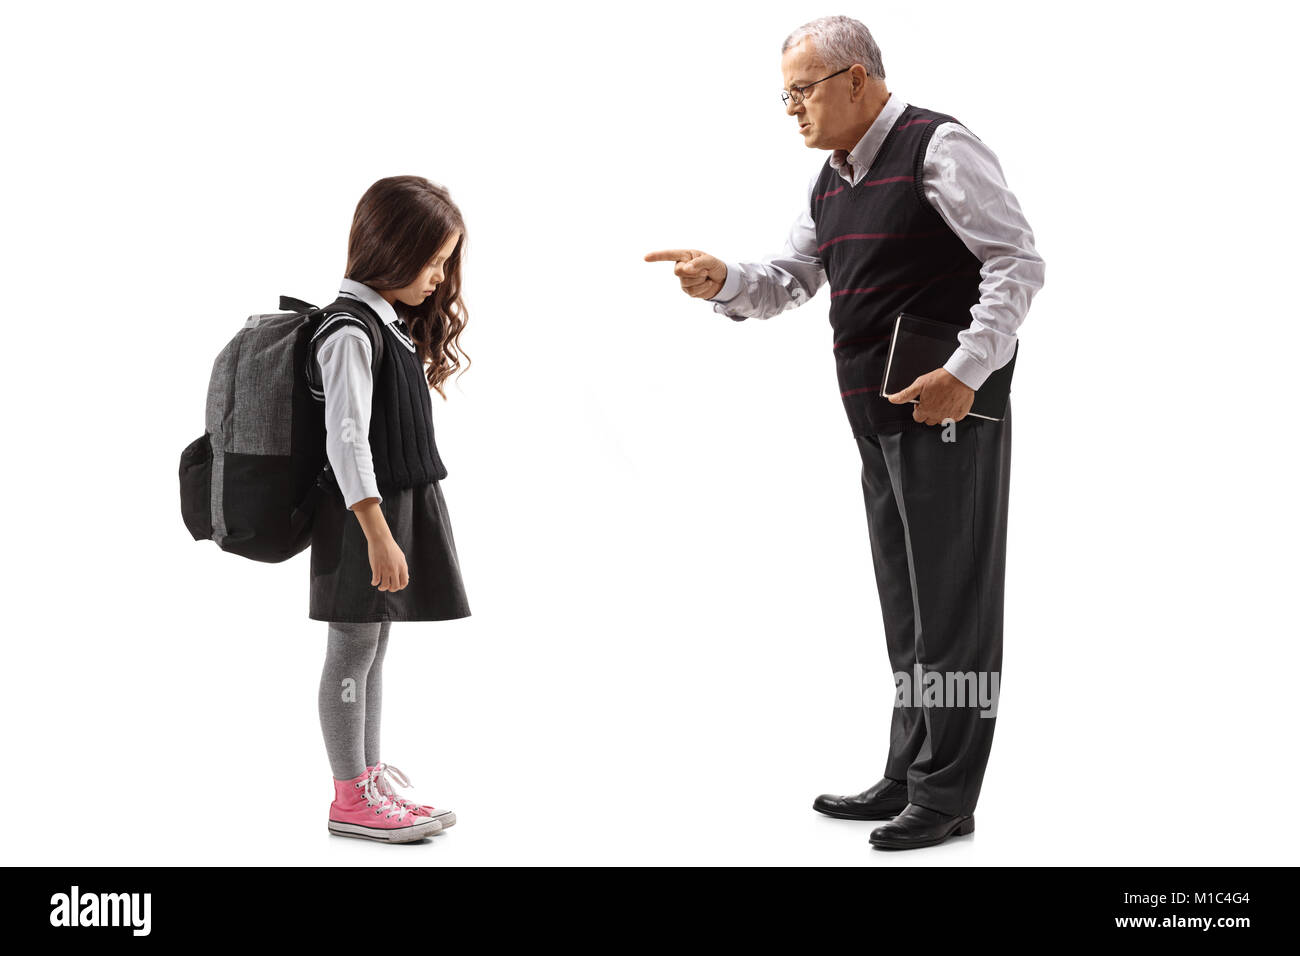 Full length profile shot of an old teacher scolding a schoolgirl isolated on white background Stock Photo